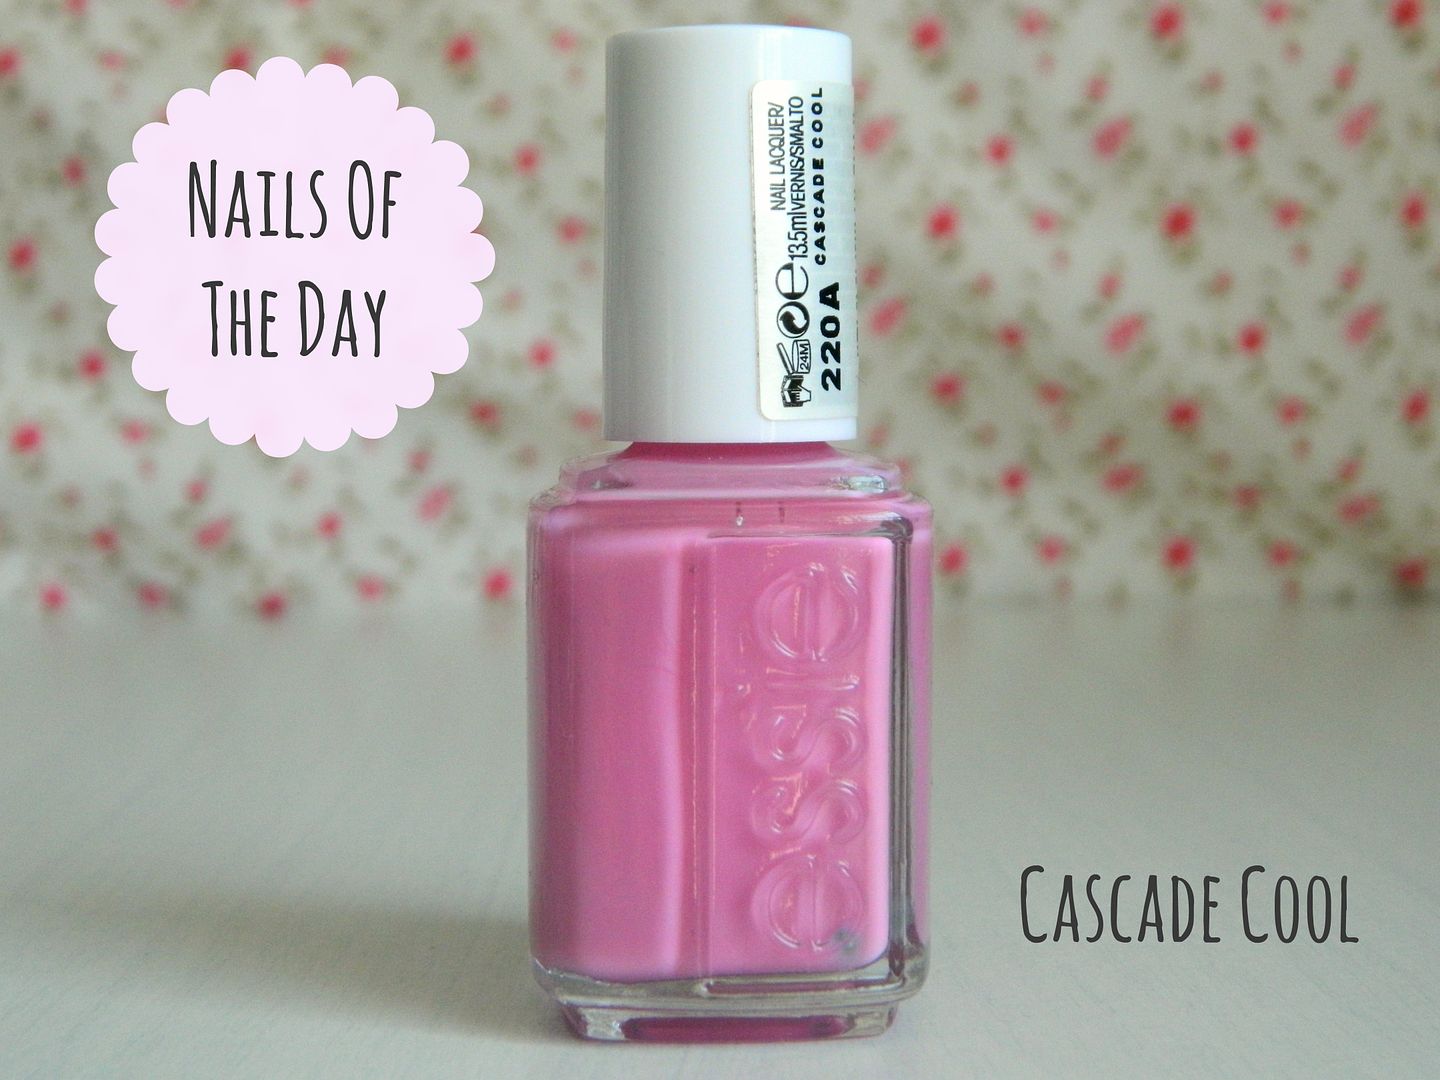 Nails Of the Day Essie Nail Lacquer Cascade Cool Belle-amie UK Beauty Fashion Lifestyle Blog